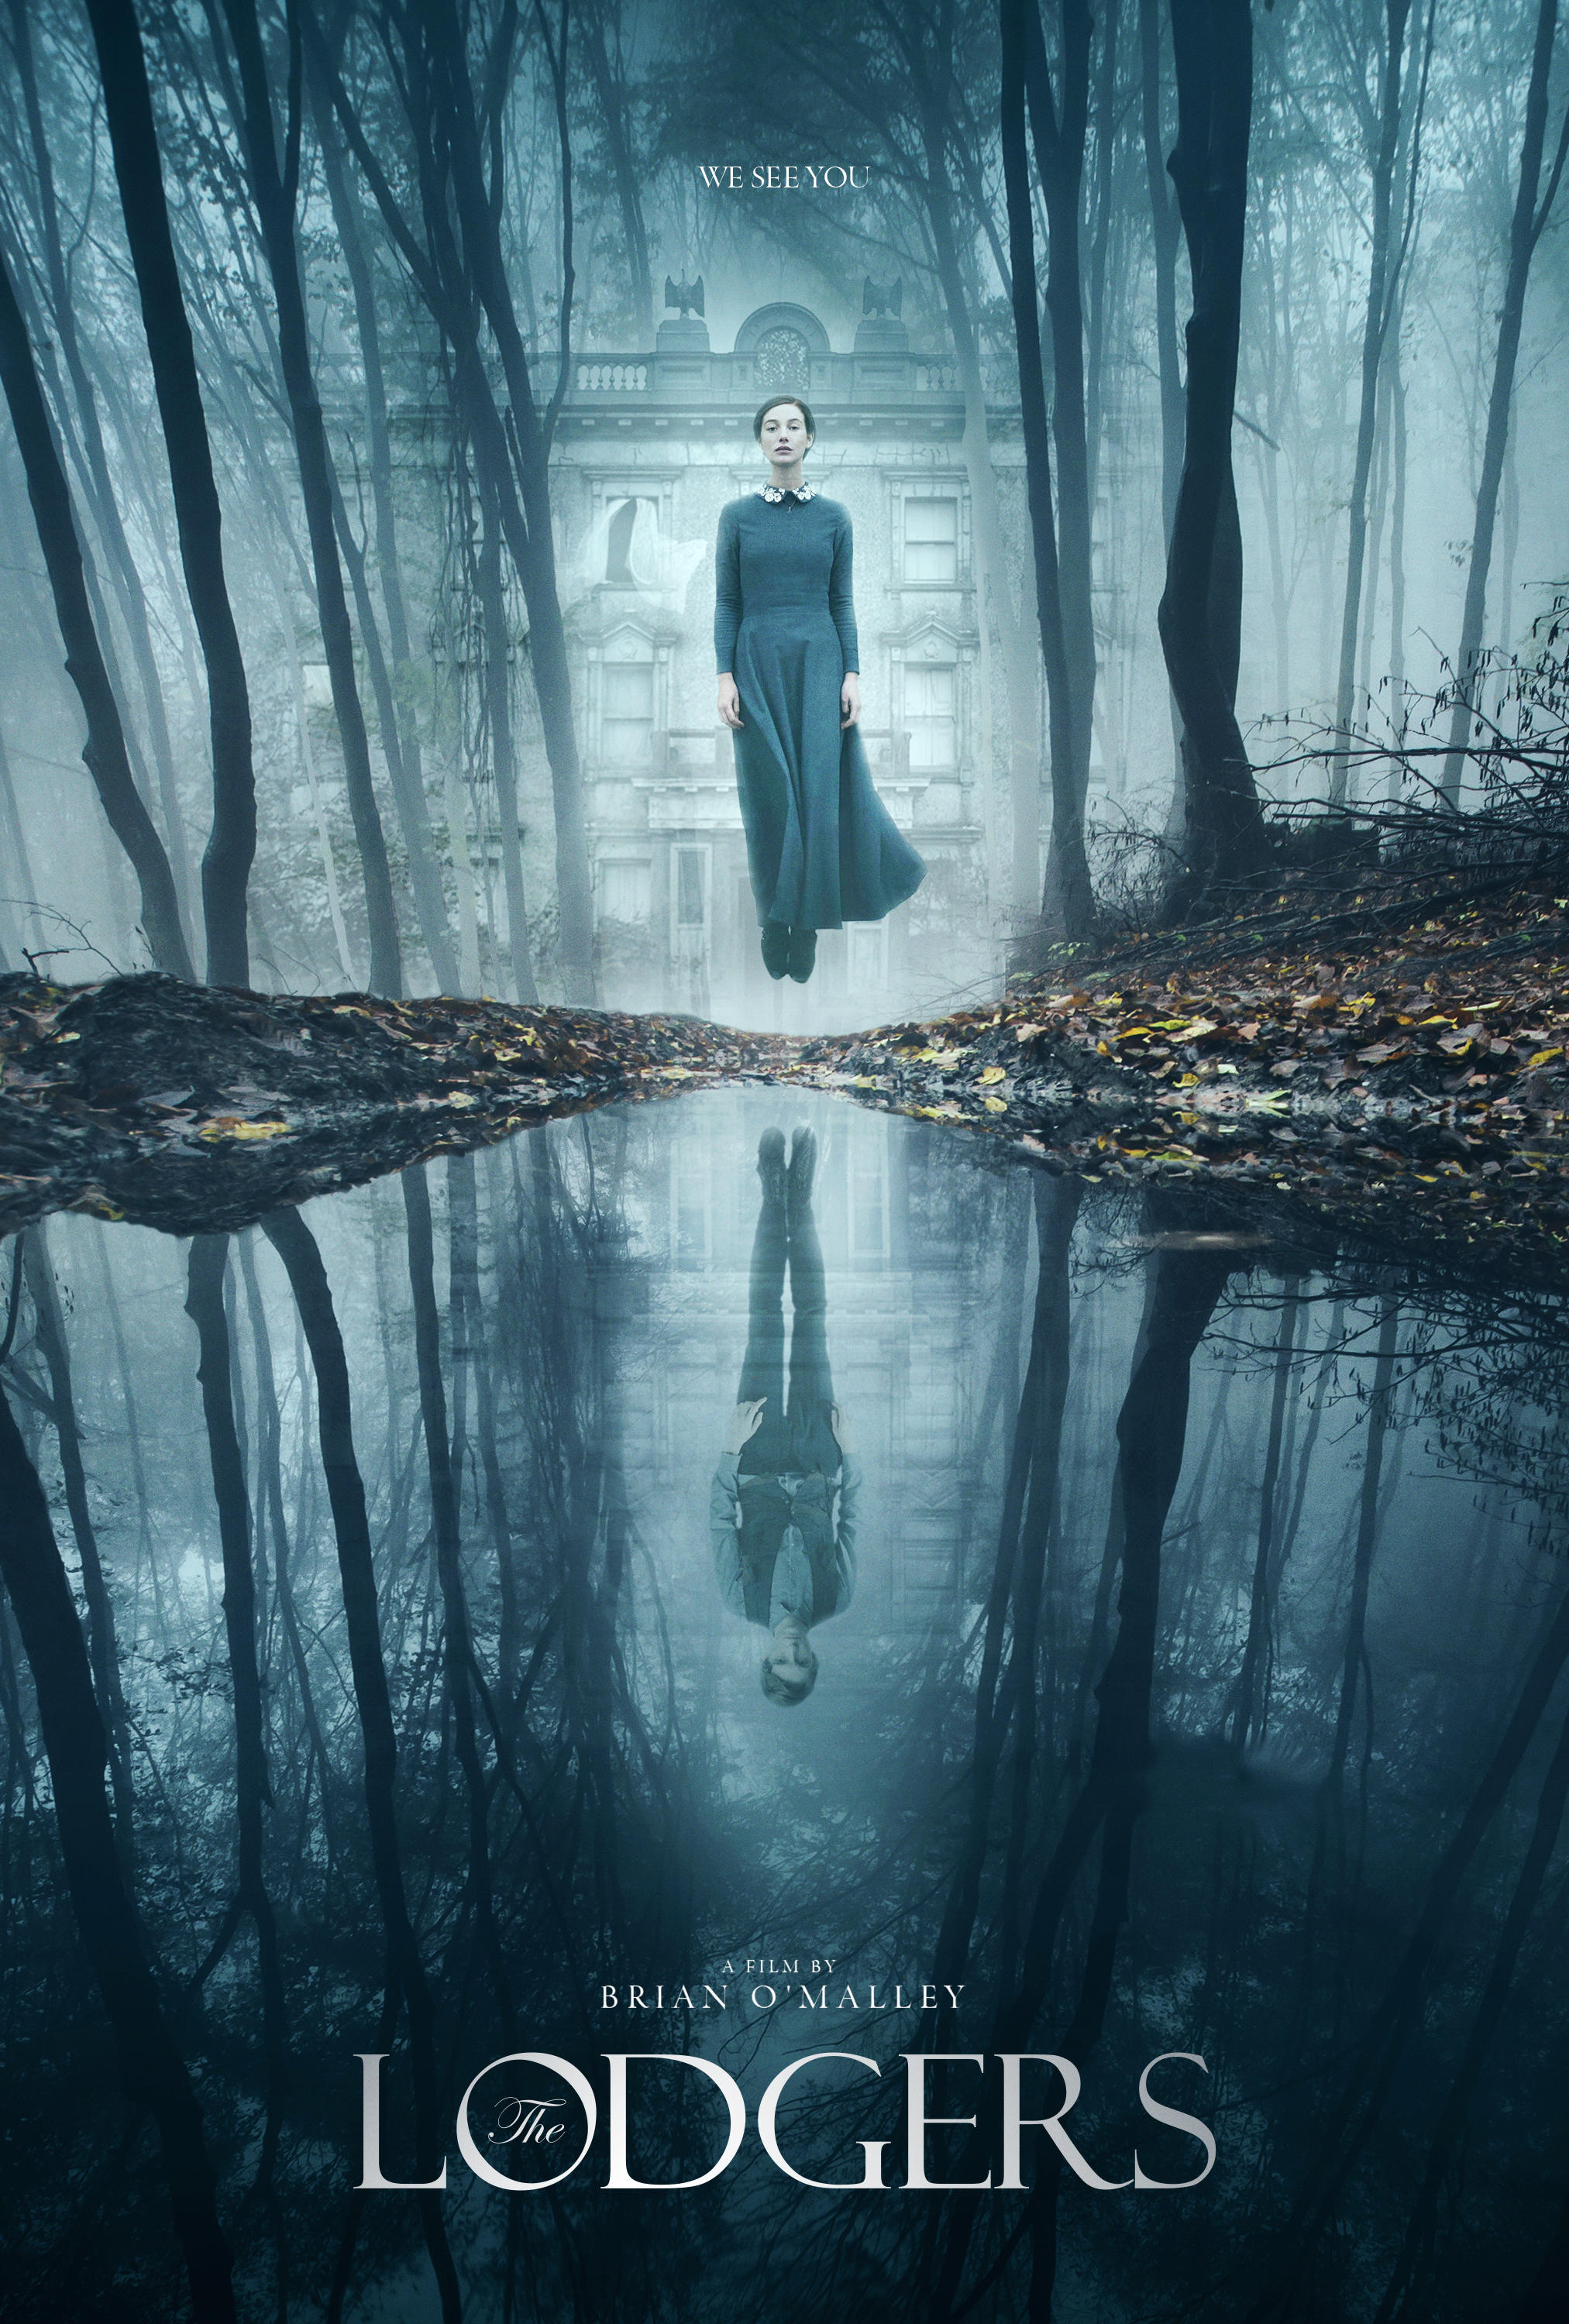 The Lodgers Glasgow FrightFest film review: twins come of age in an old dark house